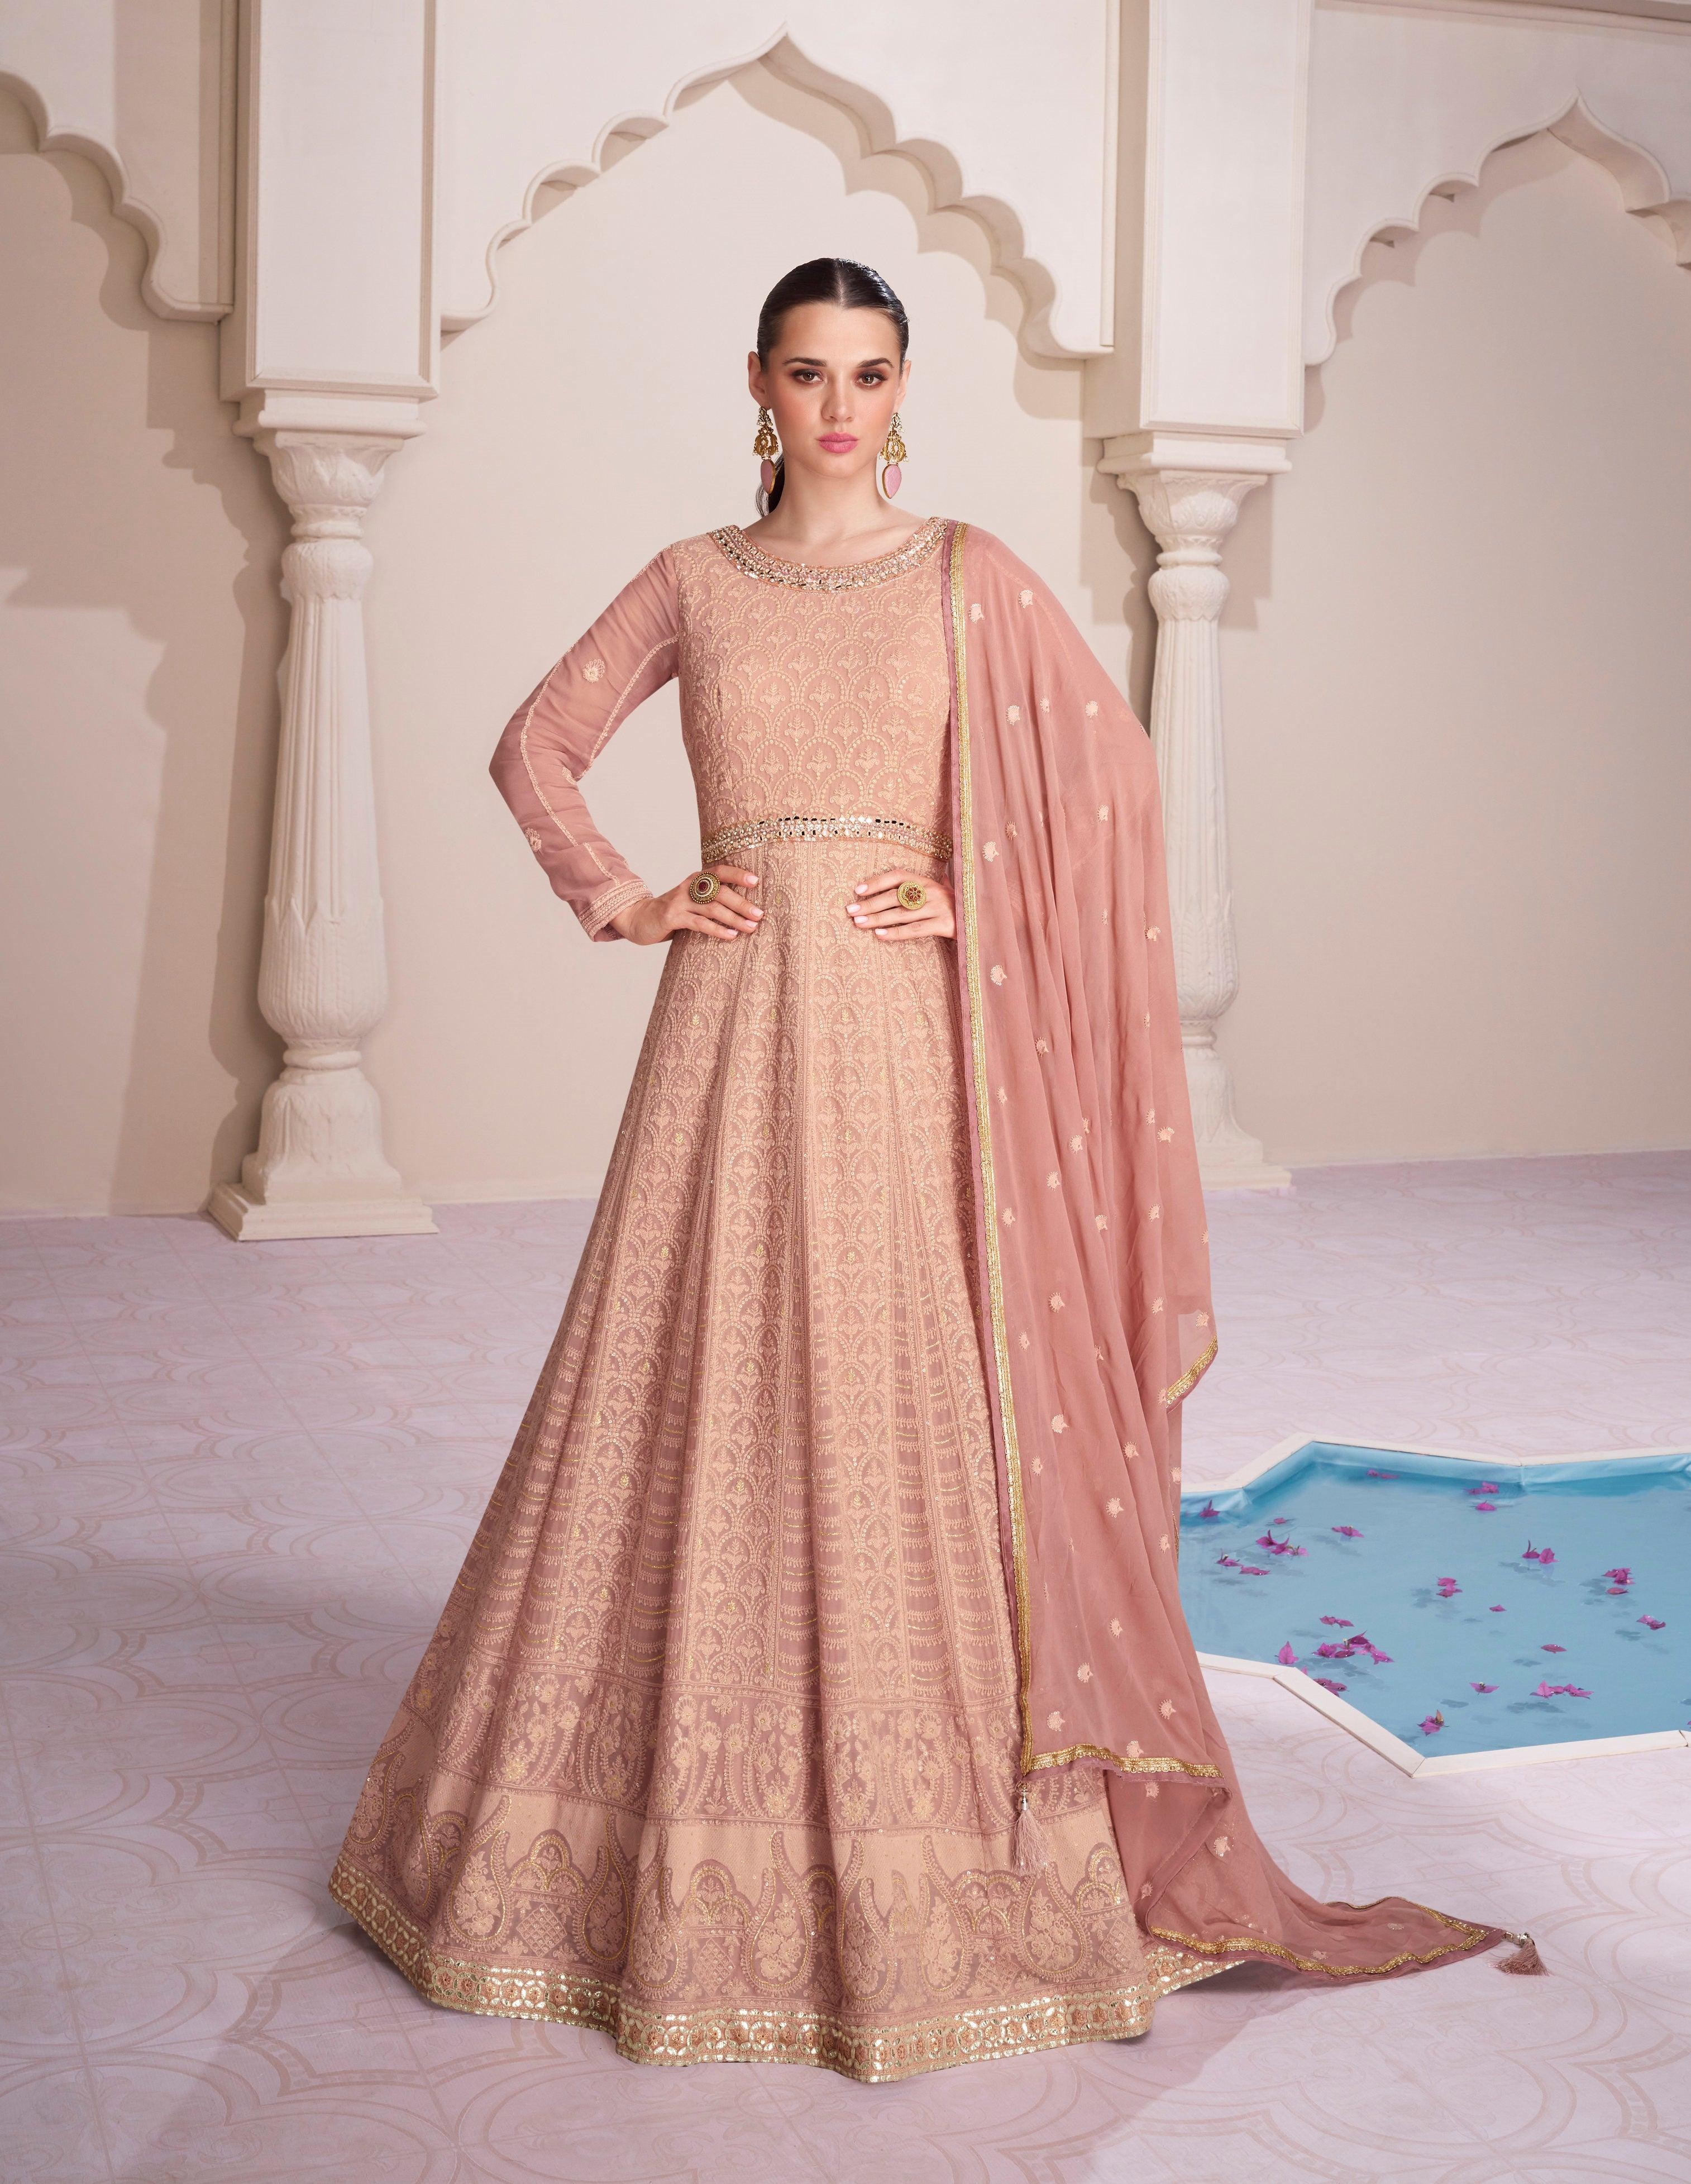 What to wear at different Indian wedding functions?